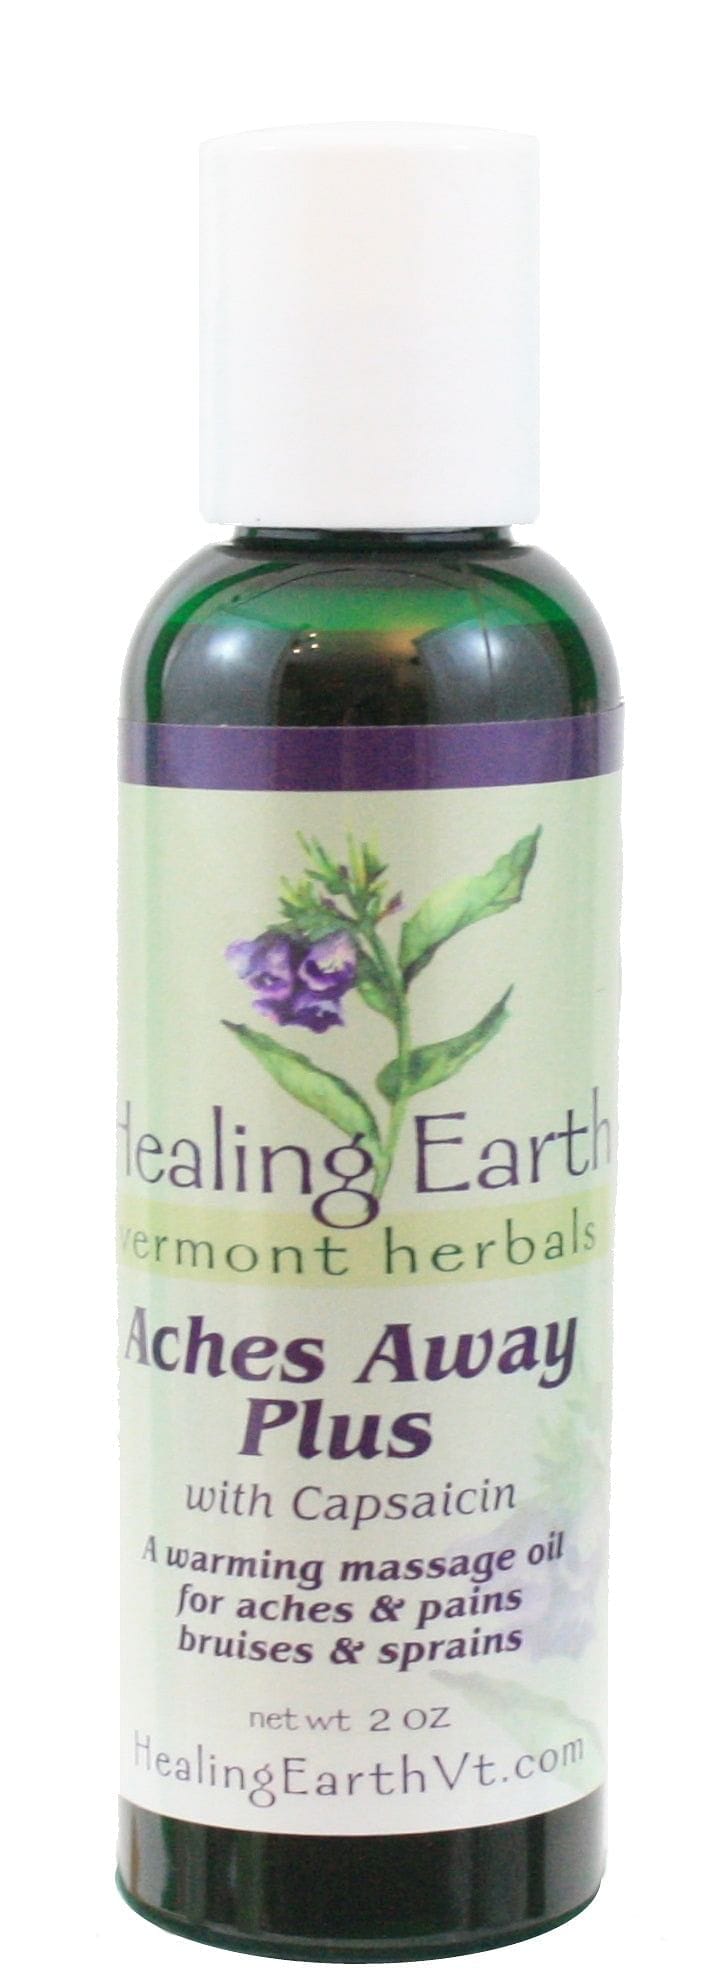 Aches Away Plus Massage Oil With Capsaicin 2 Ounce - Shelburne Country Store